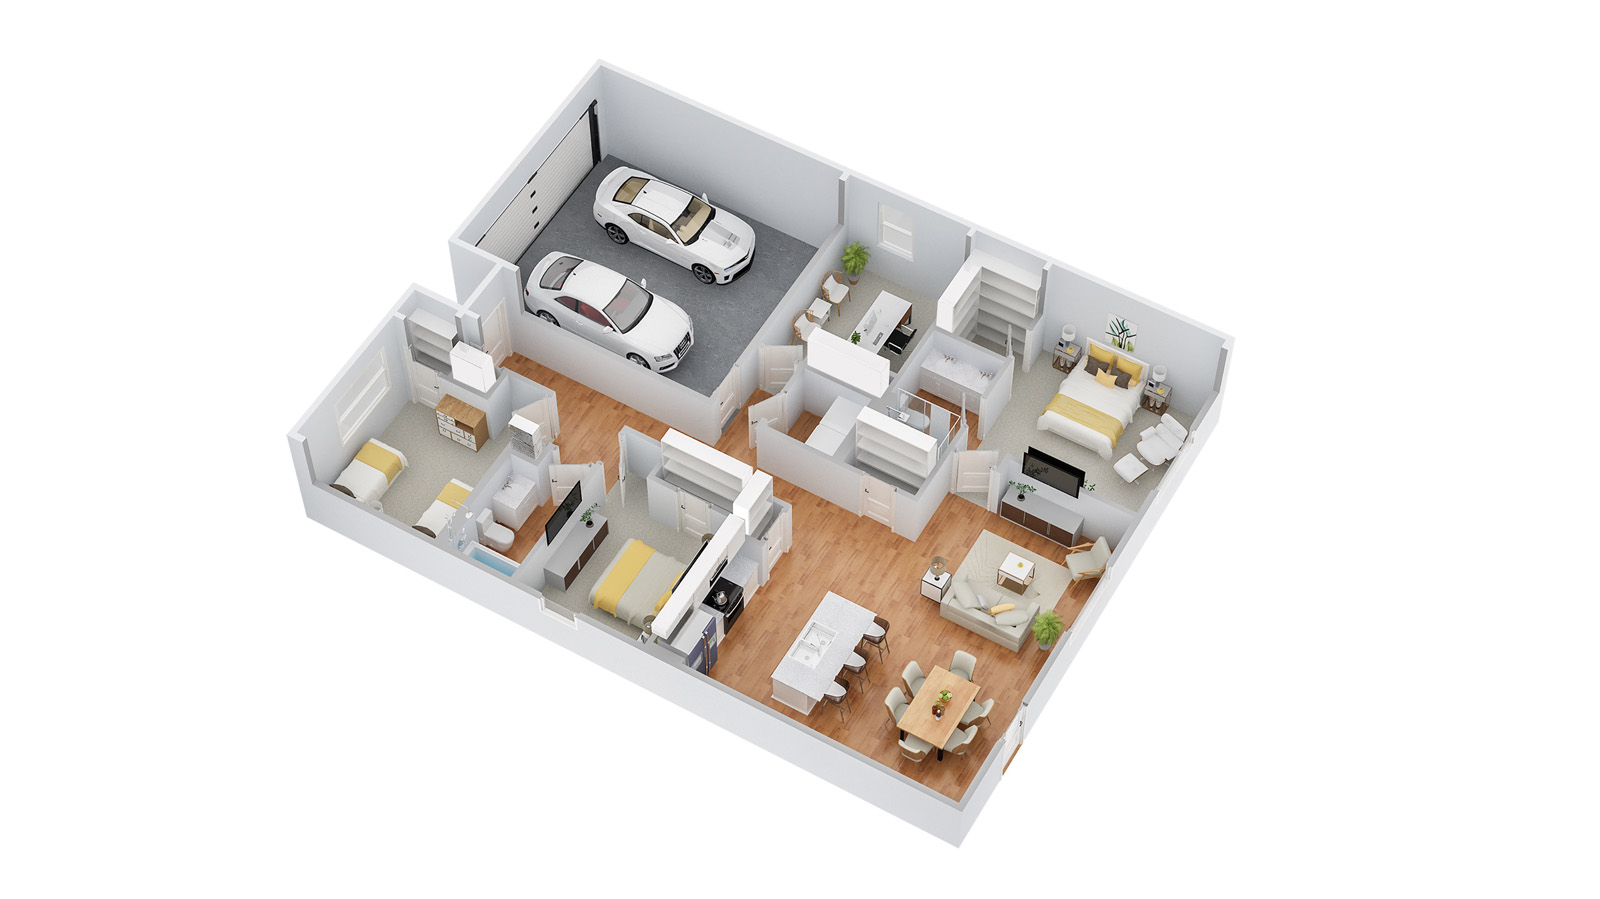 Floorplan with furniture located throughout the home